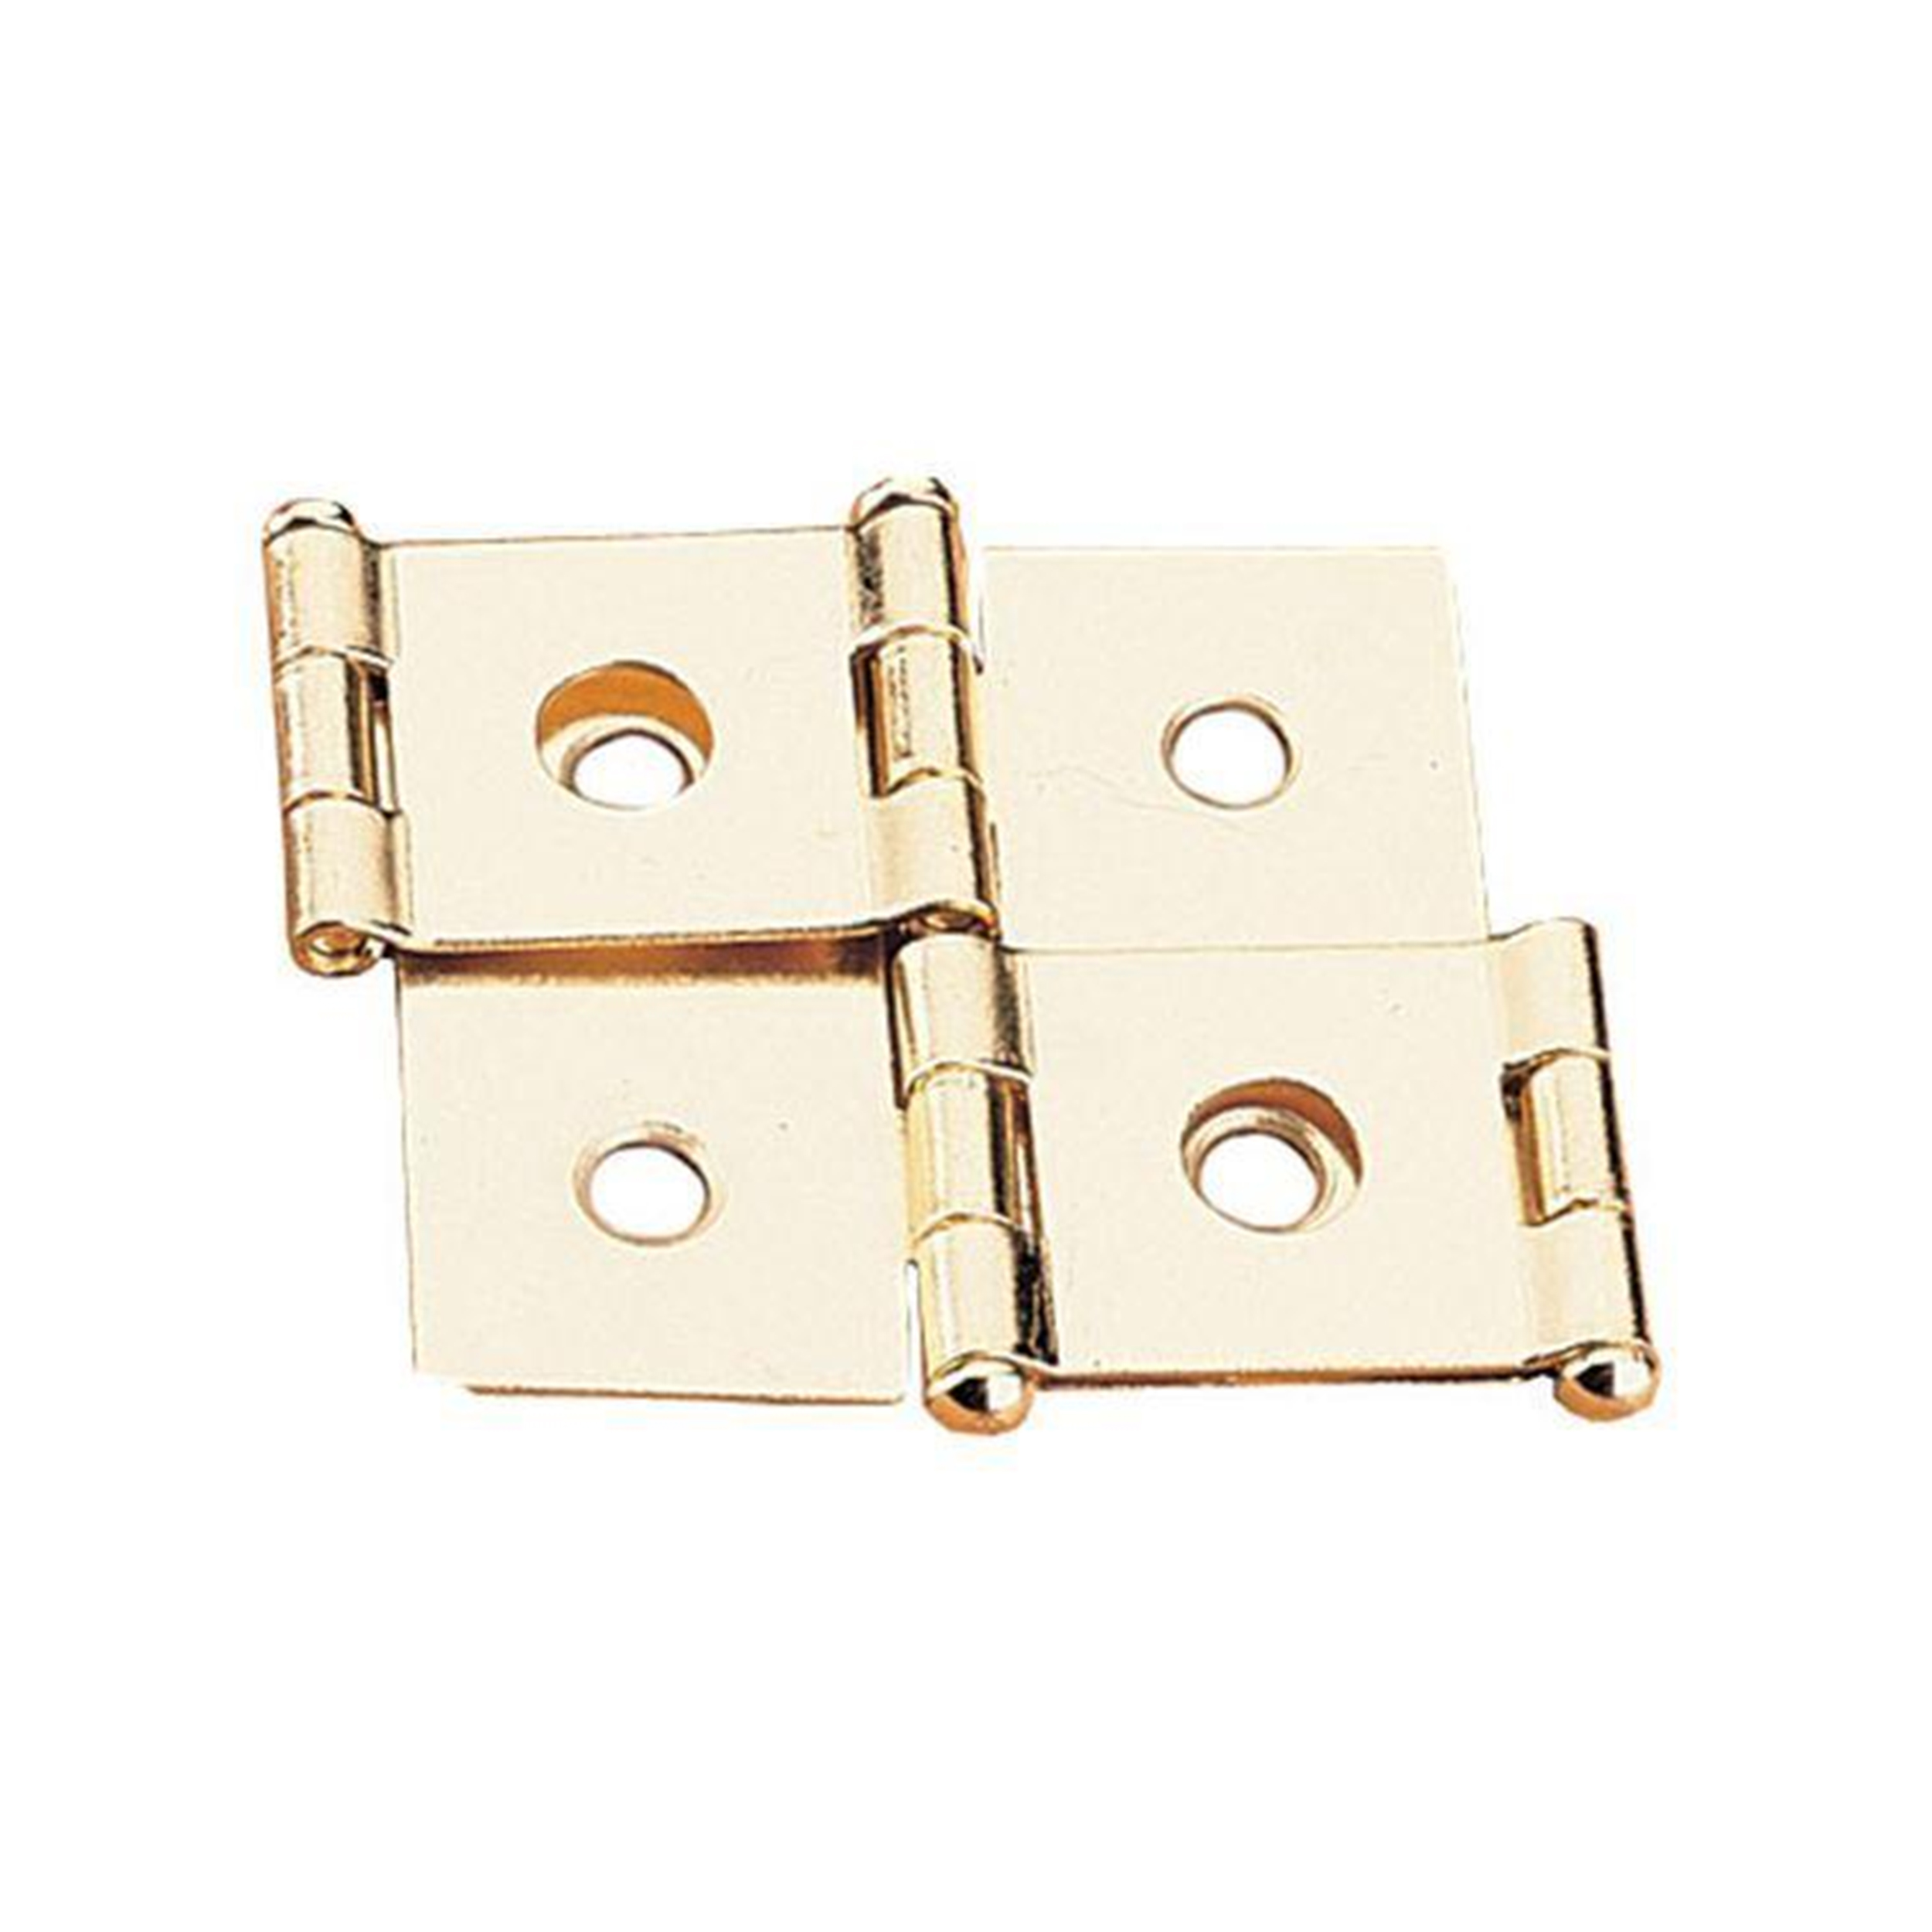 Non-mortise Hinge Polished Brass Plated, Pair, Fits 3/4" Panels